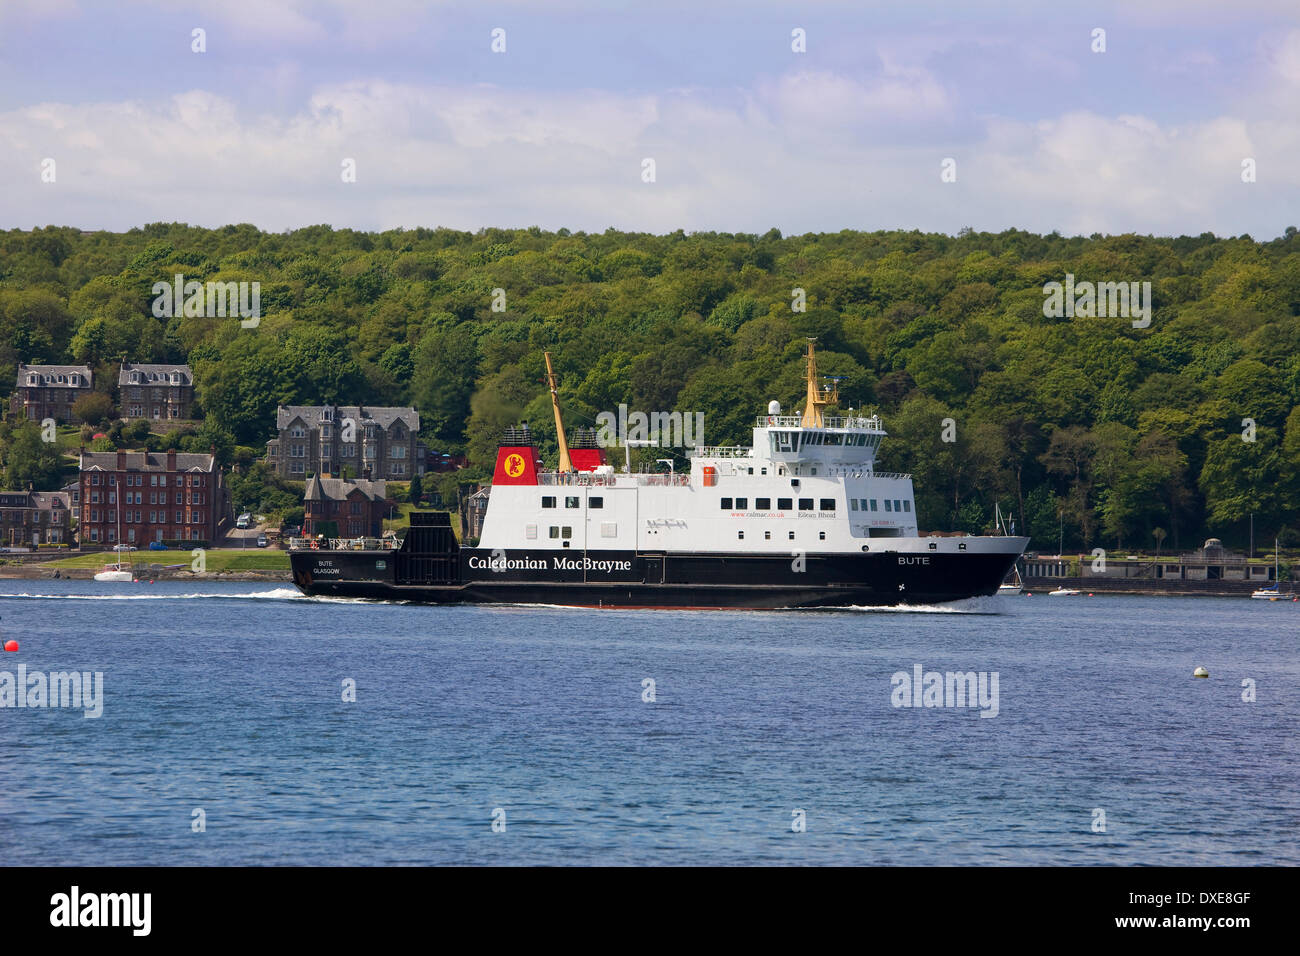 M.V.Isle of bute departing Rothesay, Isle of Bute. Stock Photo